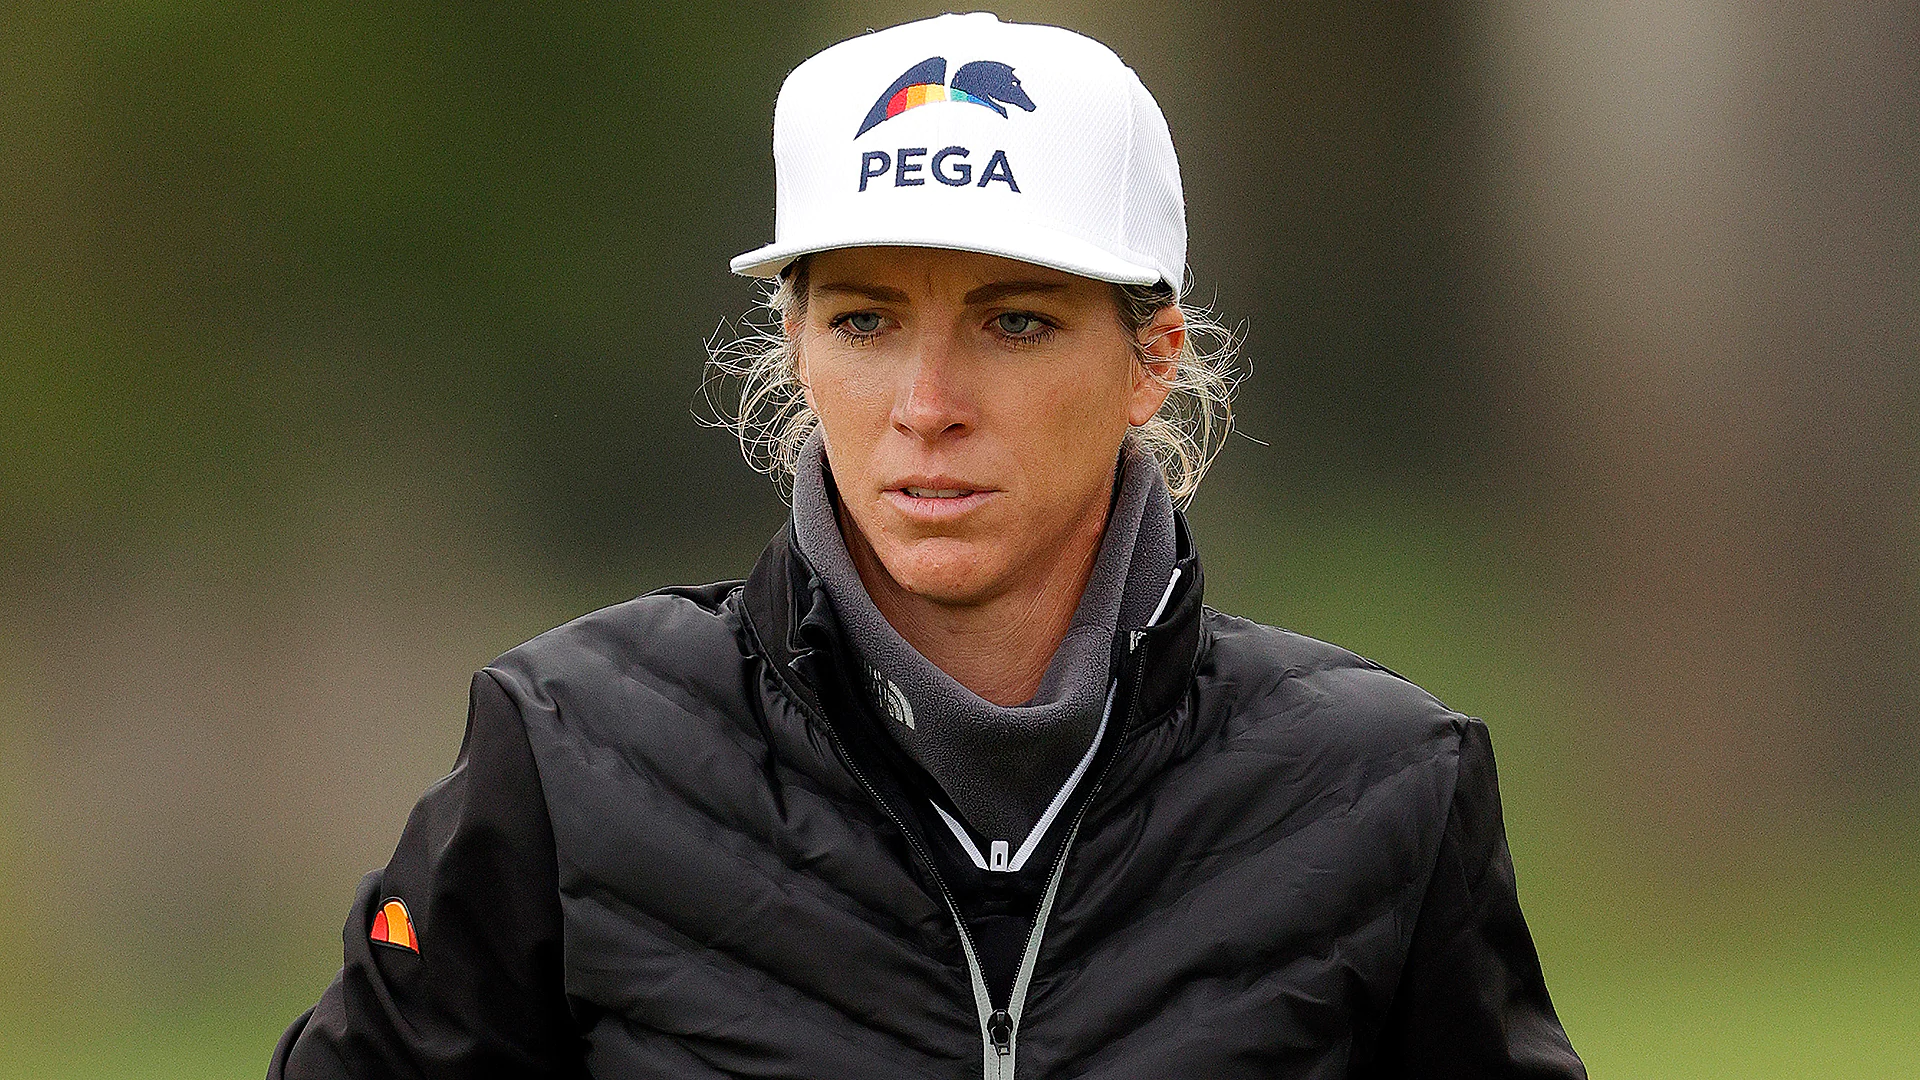 Mel Reid withdraws from Amundi Evian Championship because of travel restrictions